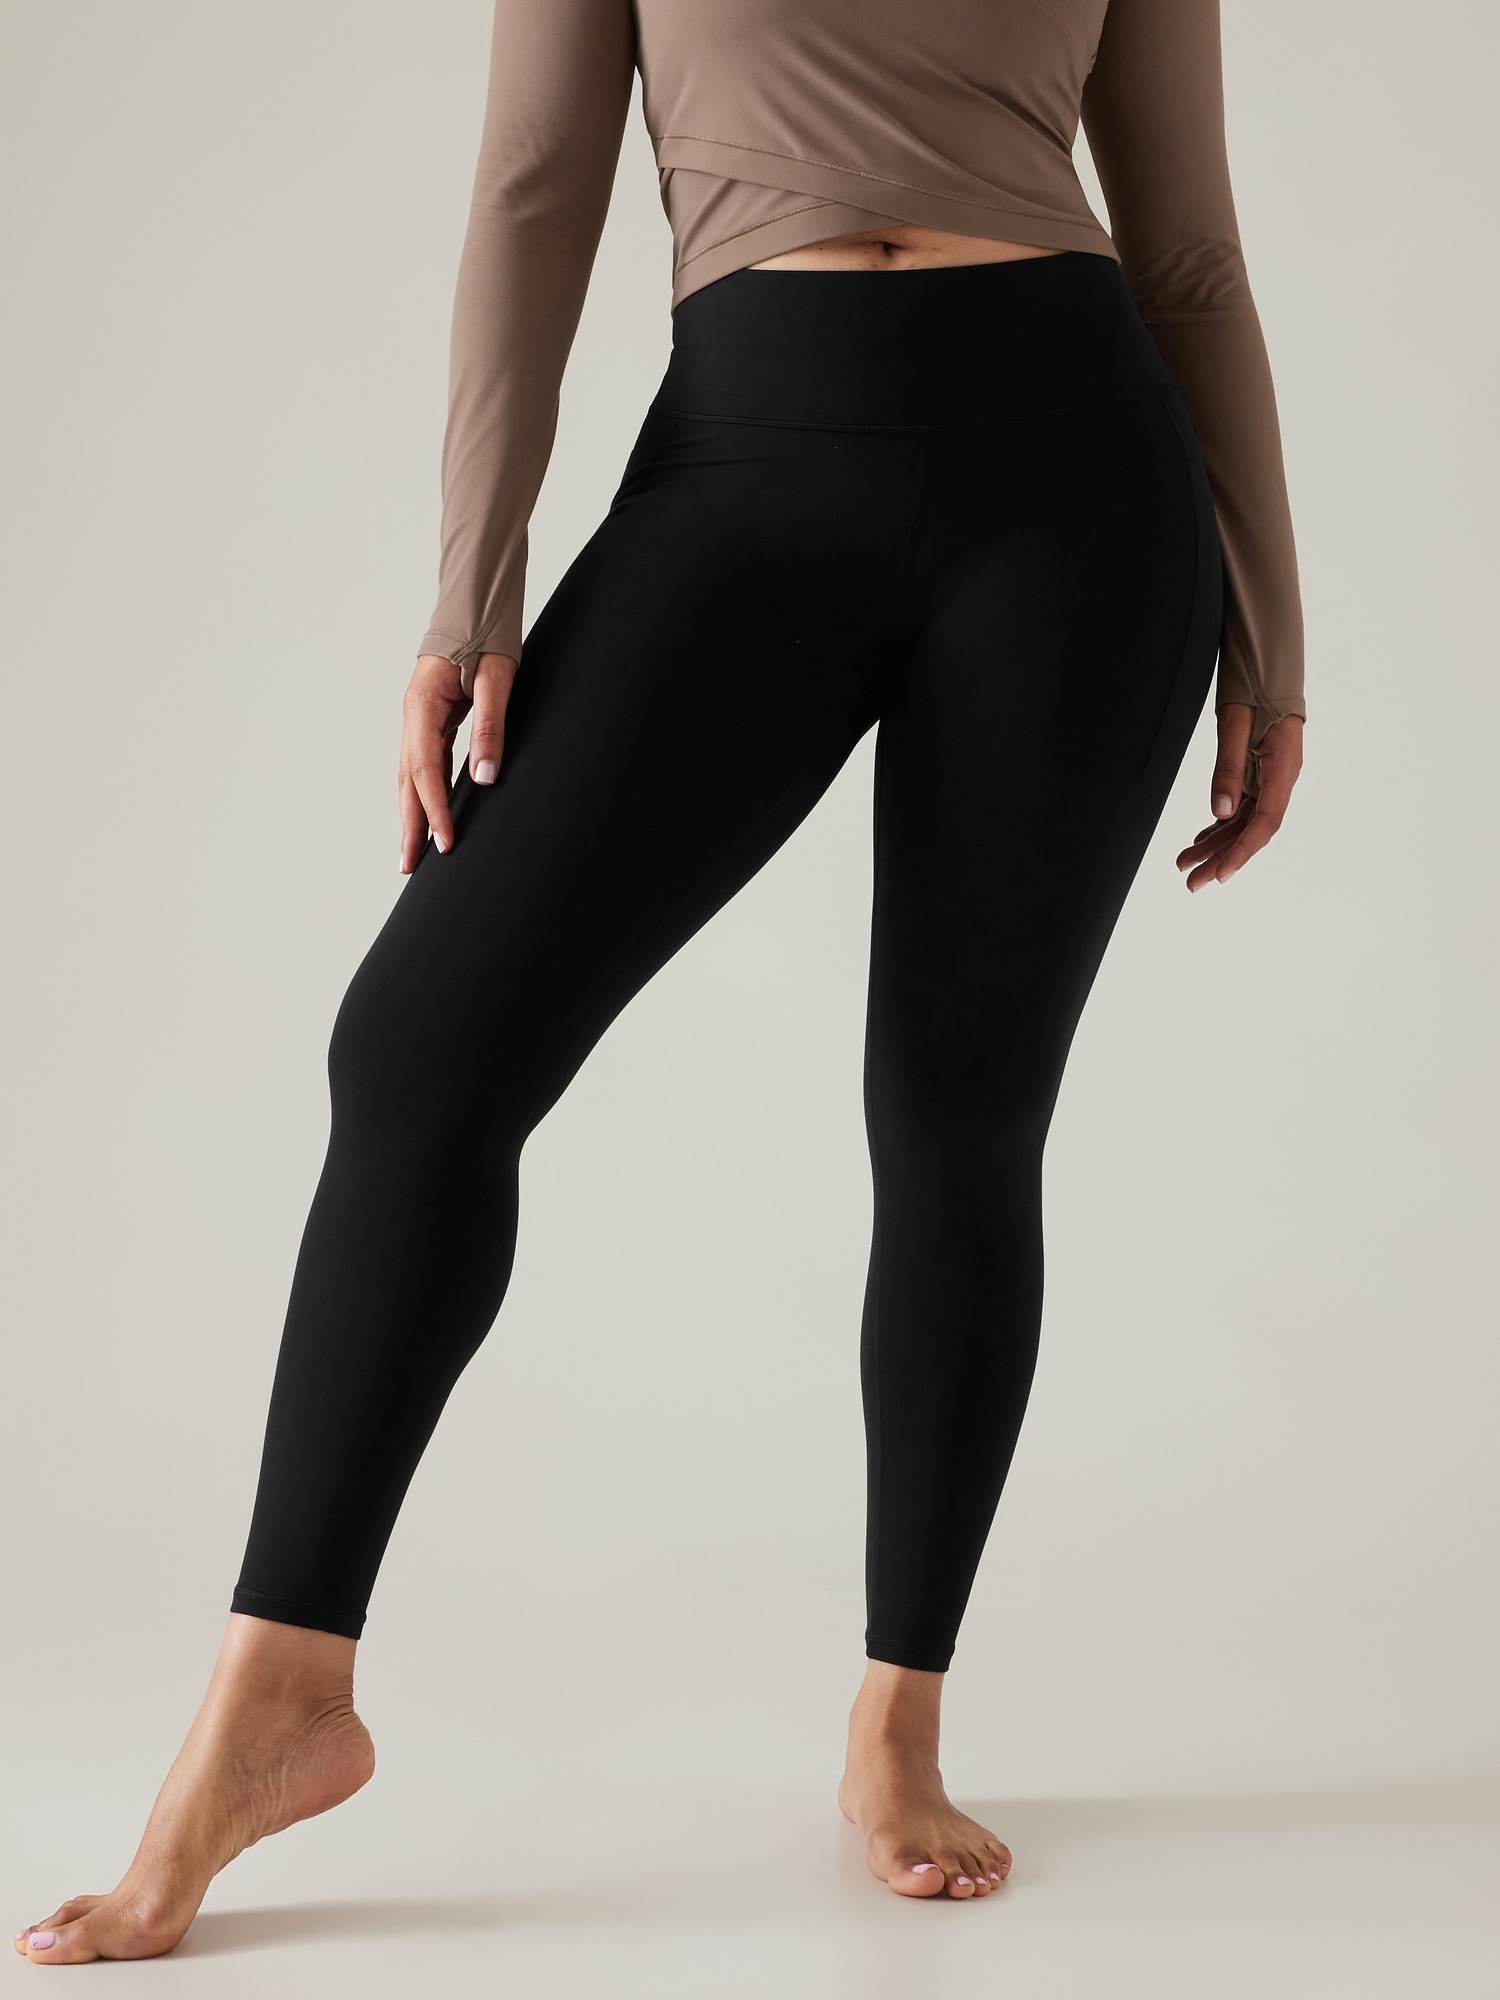 ZUTY 78 Workout Leggings for Women High Waisted Leggings with